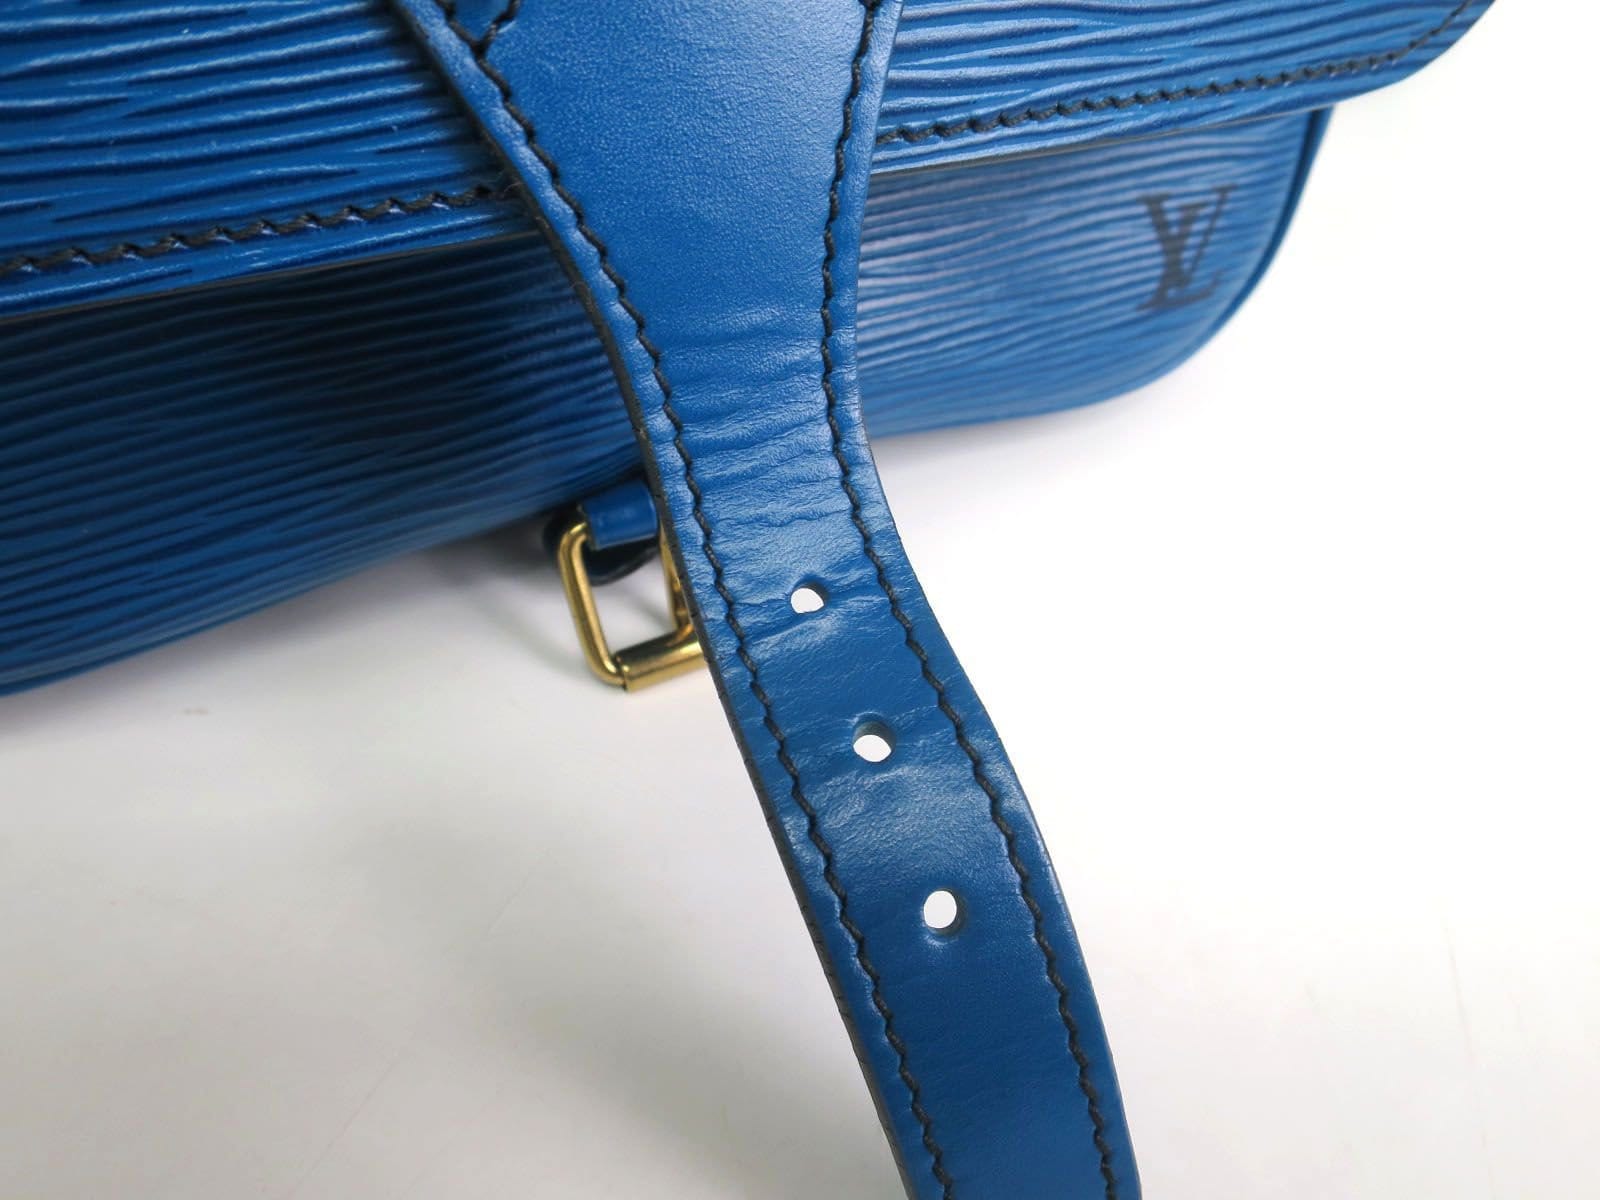 What is Epi Leather and How Do I Look After it? - The Handbag Spa